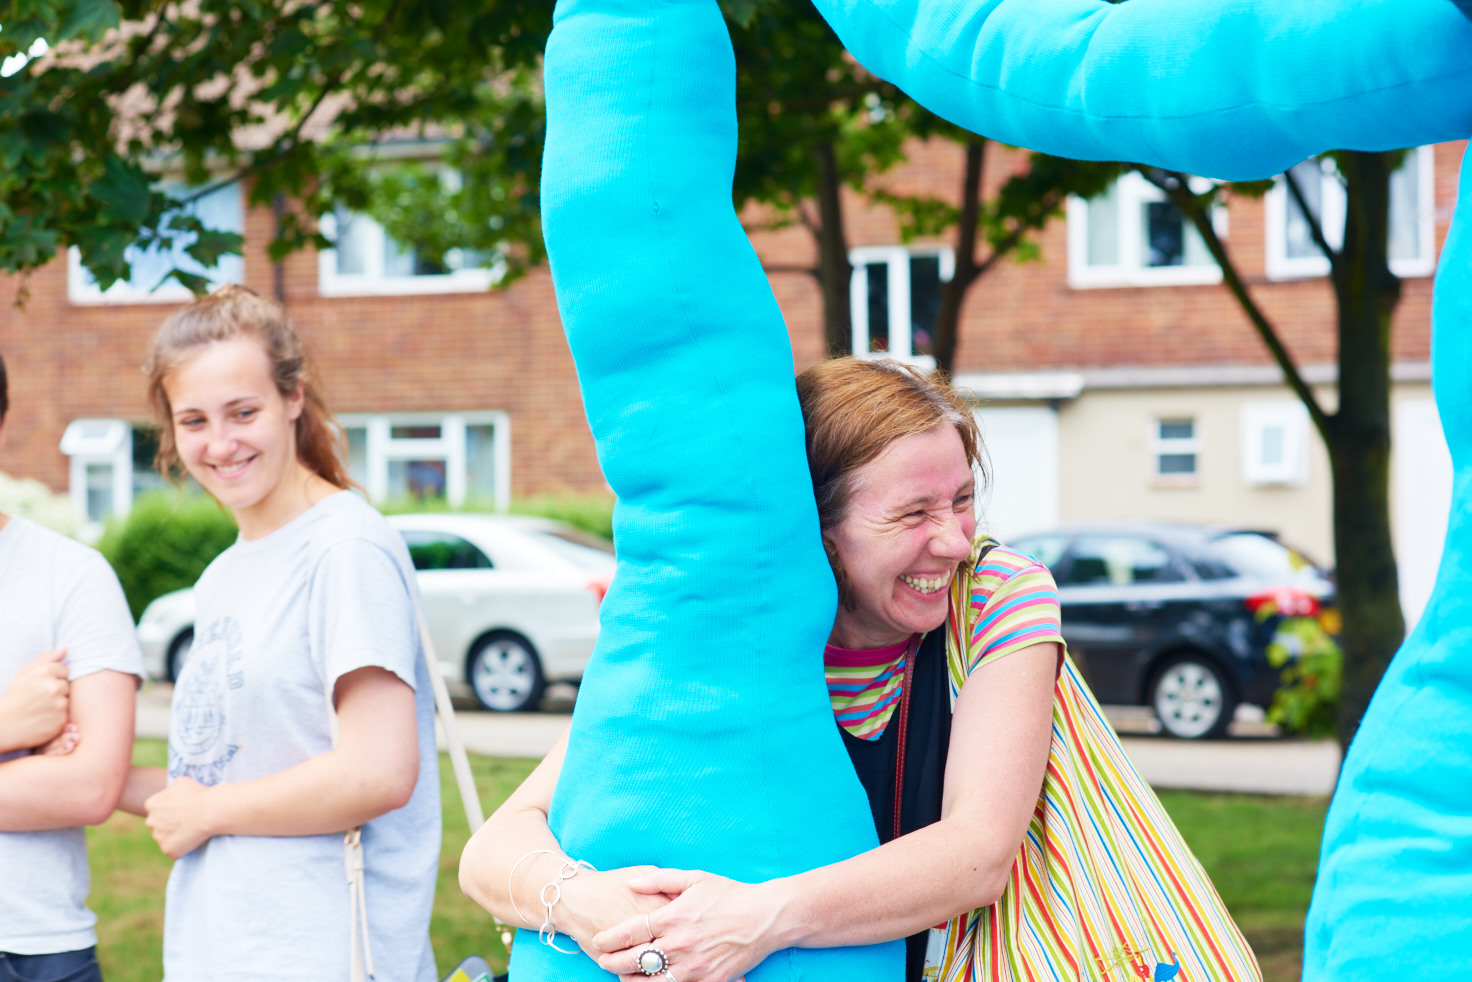 A photo showing an art installation on a green in front of a row of houses. The installation is large blue fabric tubes strung up about 2.5 metres in the air, with sections hanging down into large lumpy bulbs just off the ground. A woman is hugging one of the bulbs and laughing. Someone behind her is watching and smiling.